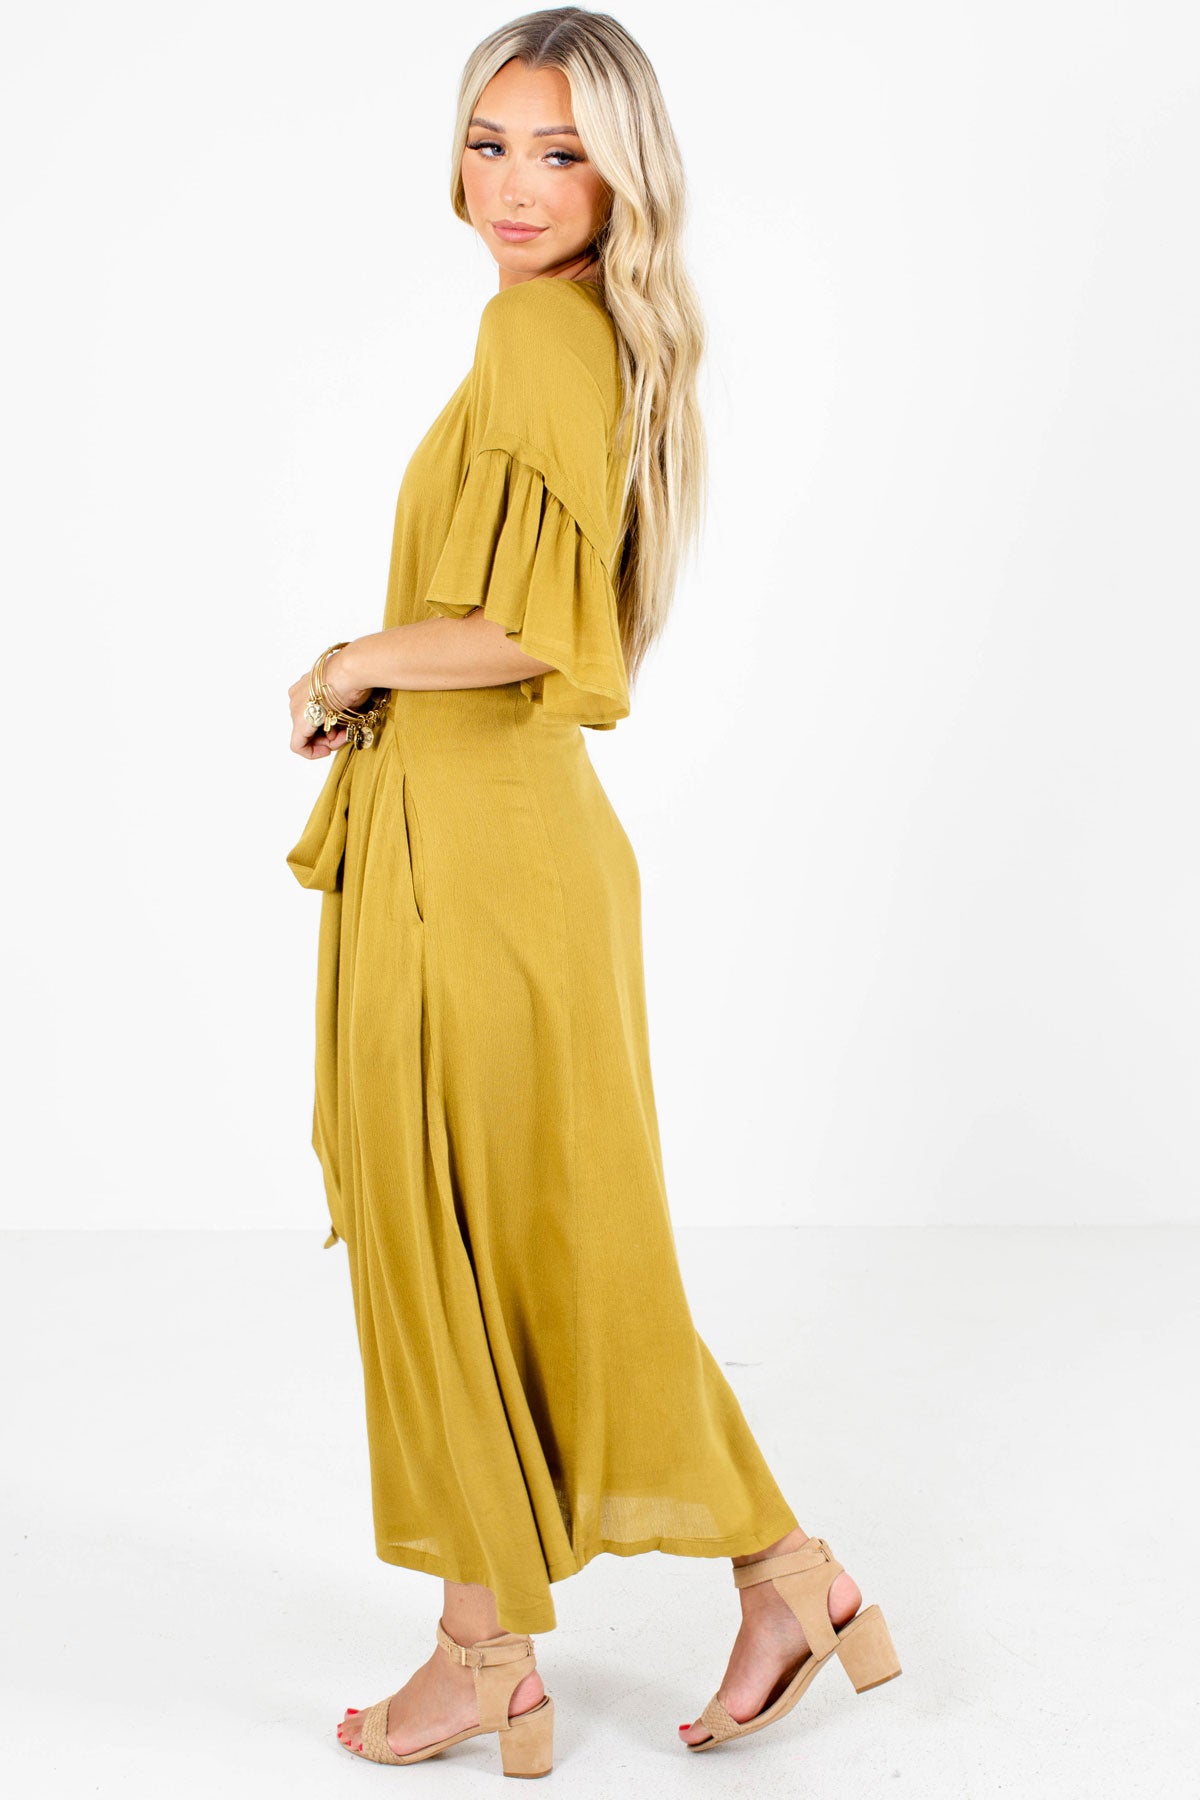 Women's Yellow Fully Lined Boutique Maxi Dress